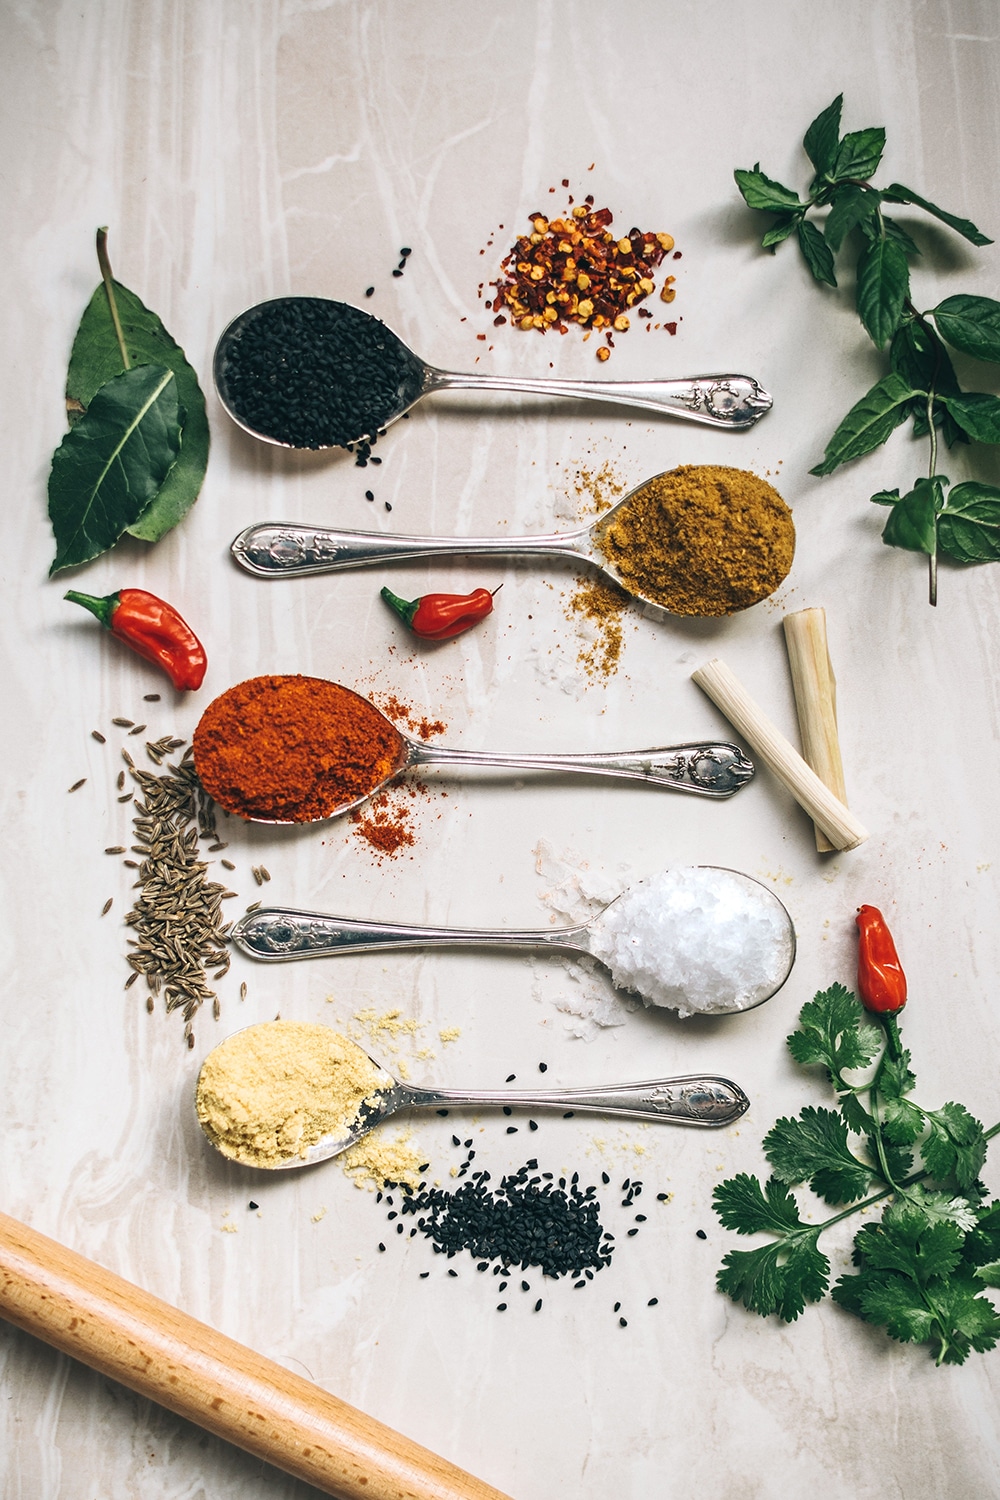 Sweet-smelling spices and flavors